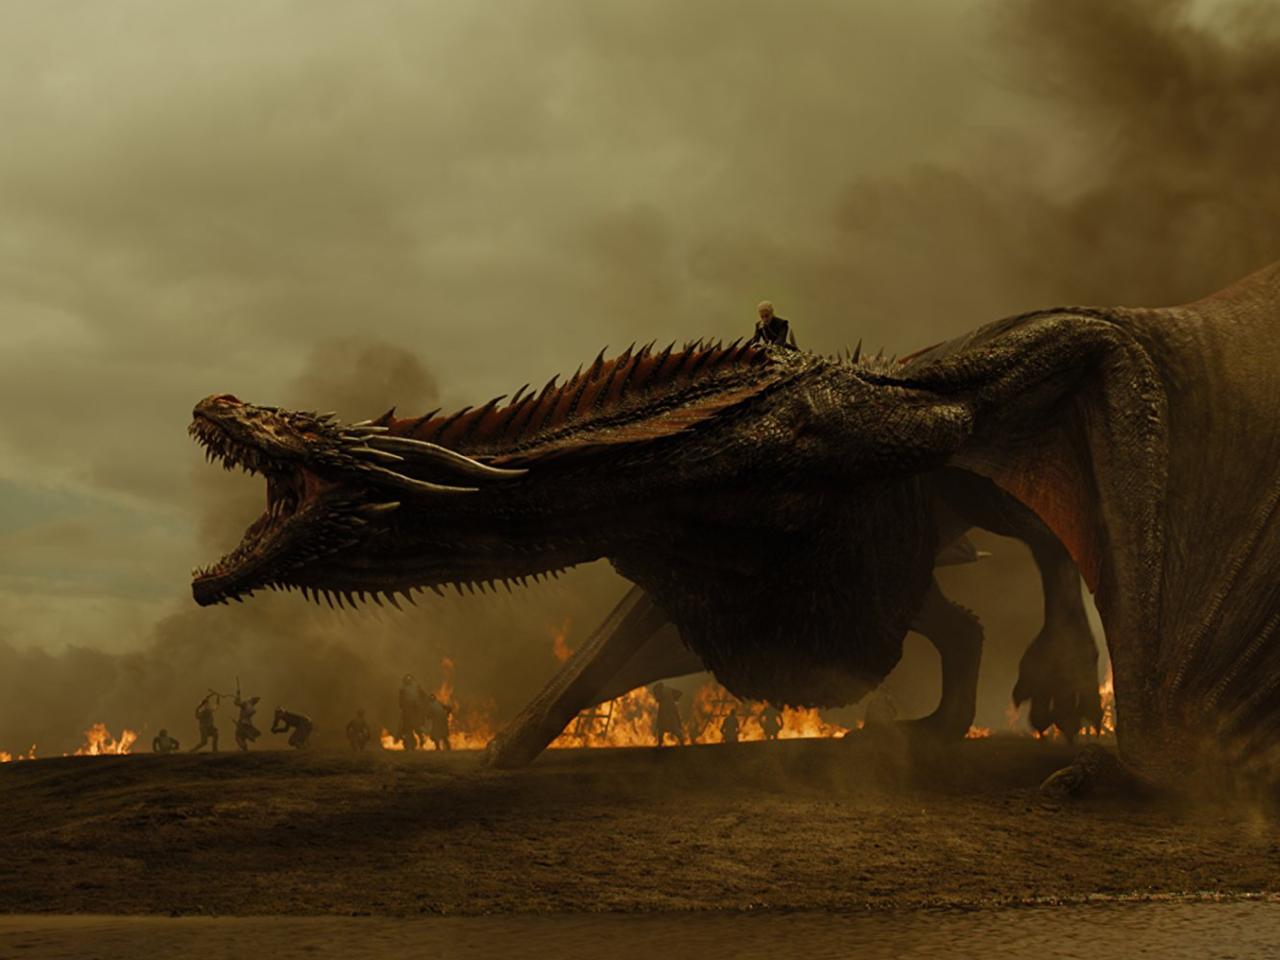 5. "The Spoils Of War" (Game of Thrones)